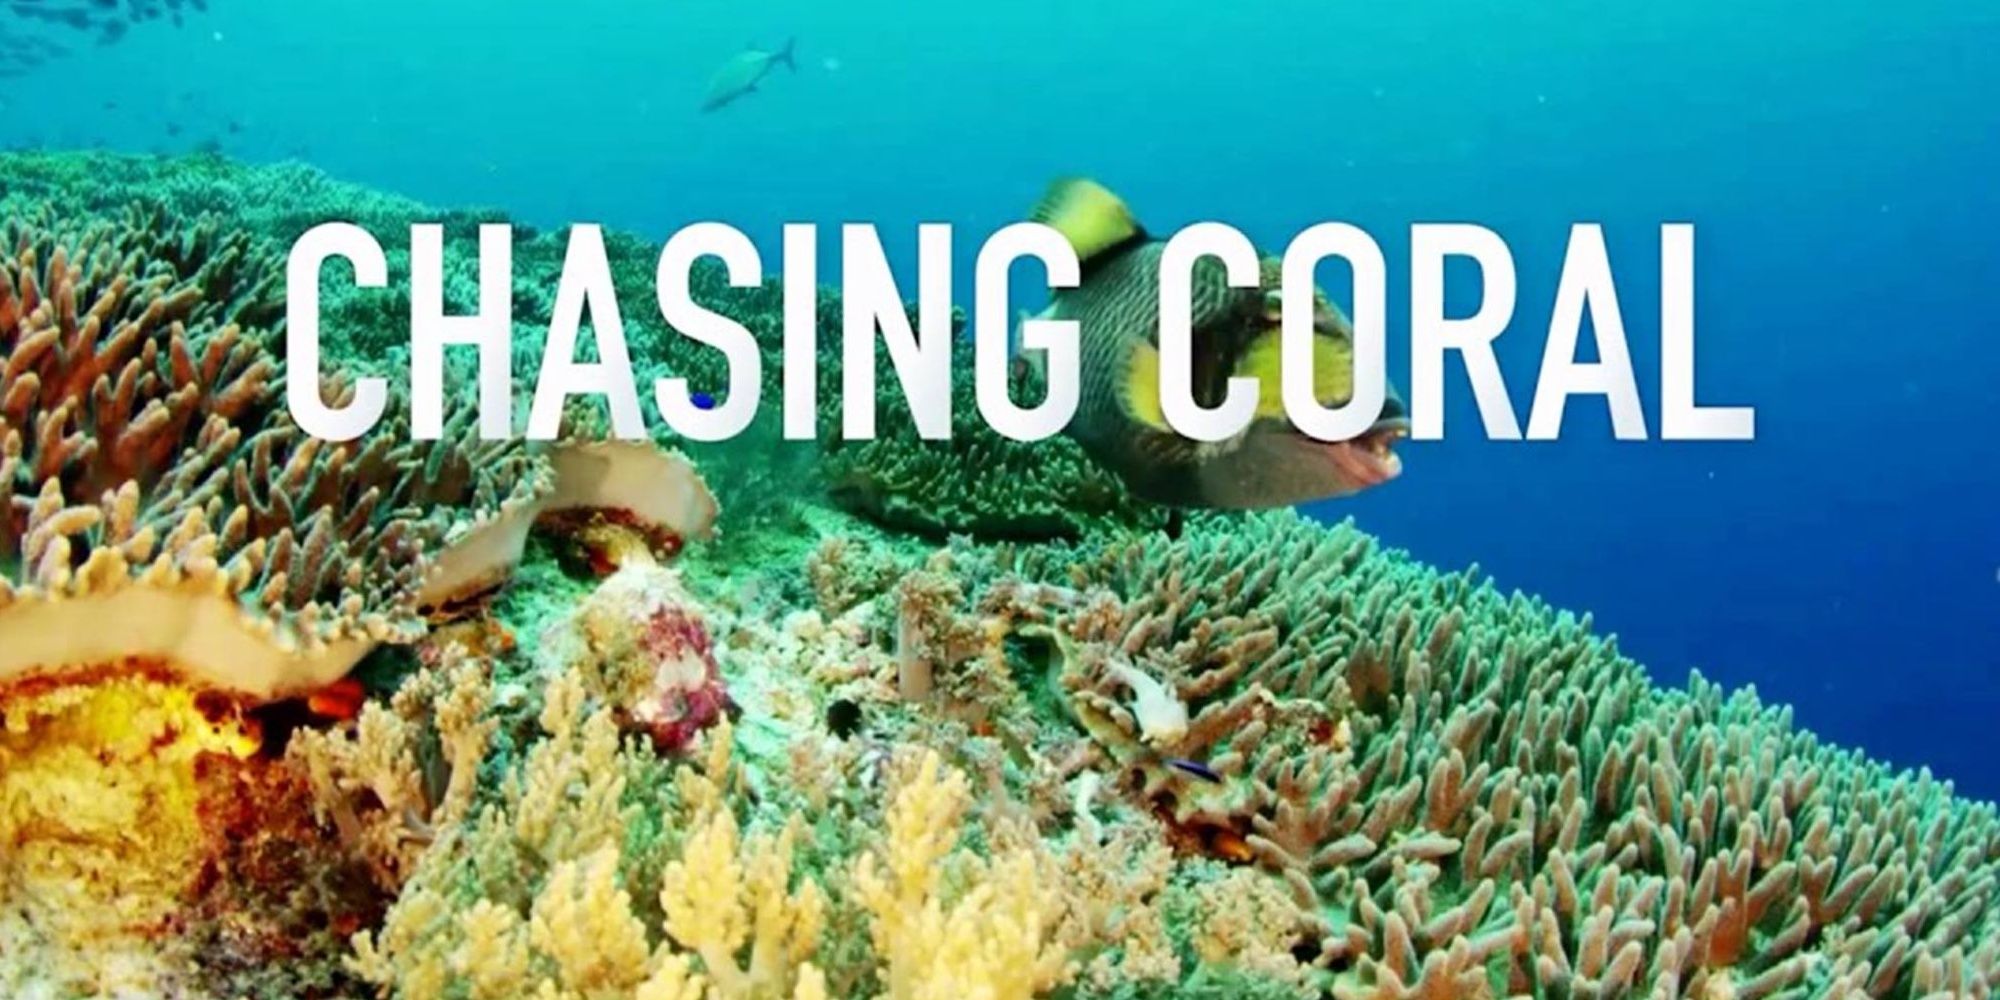 Title screen for Chasing Coral ( showing underwater with coral)